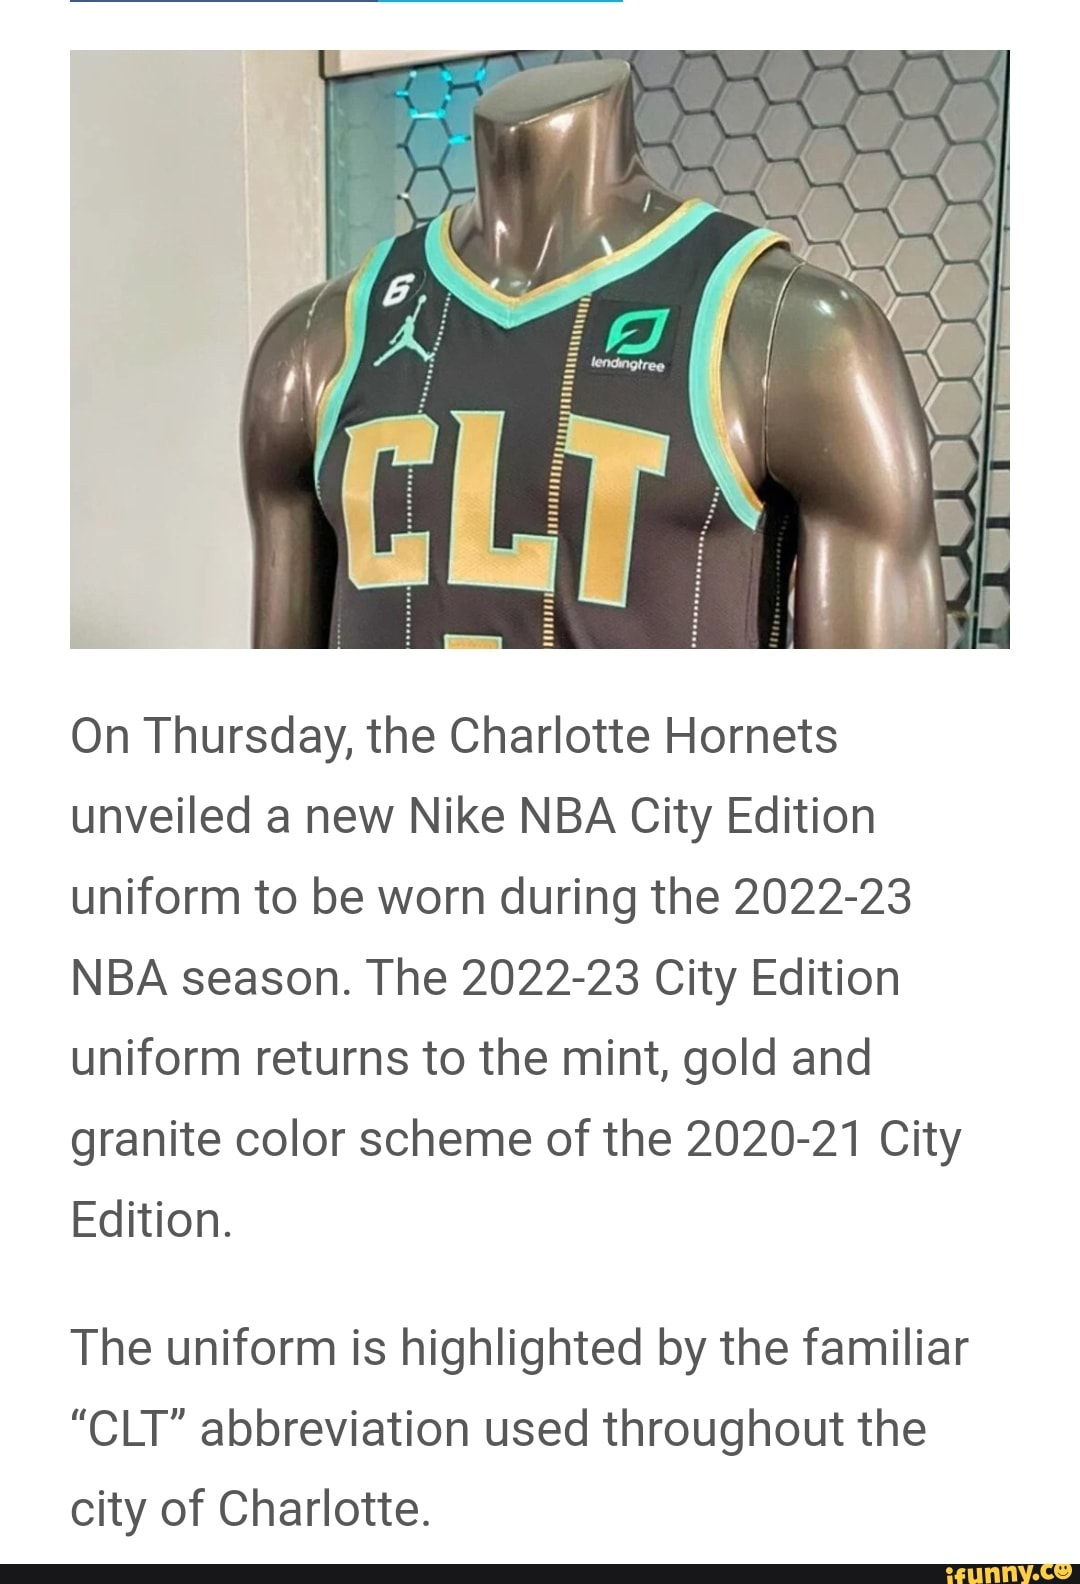 Charlotte Hornets Bombarded With Sexual Jokes After Unveiling 'CLT' Jerseys